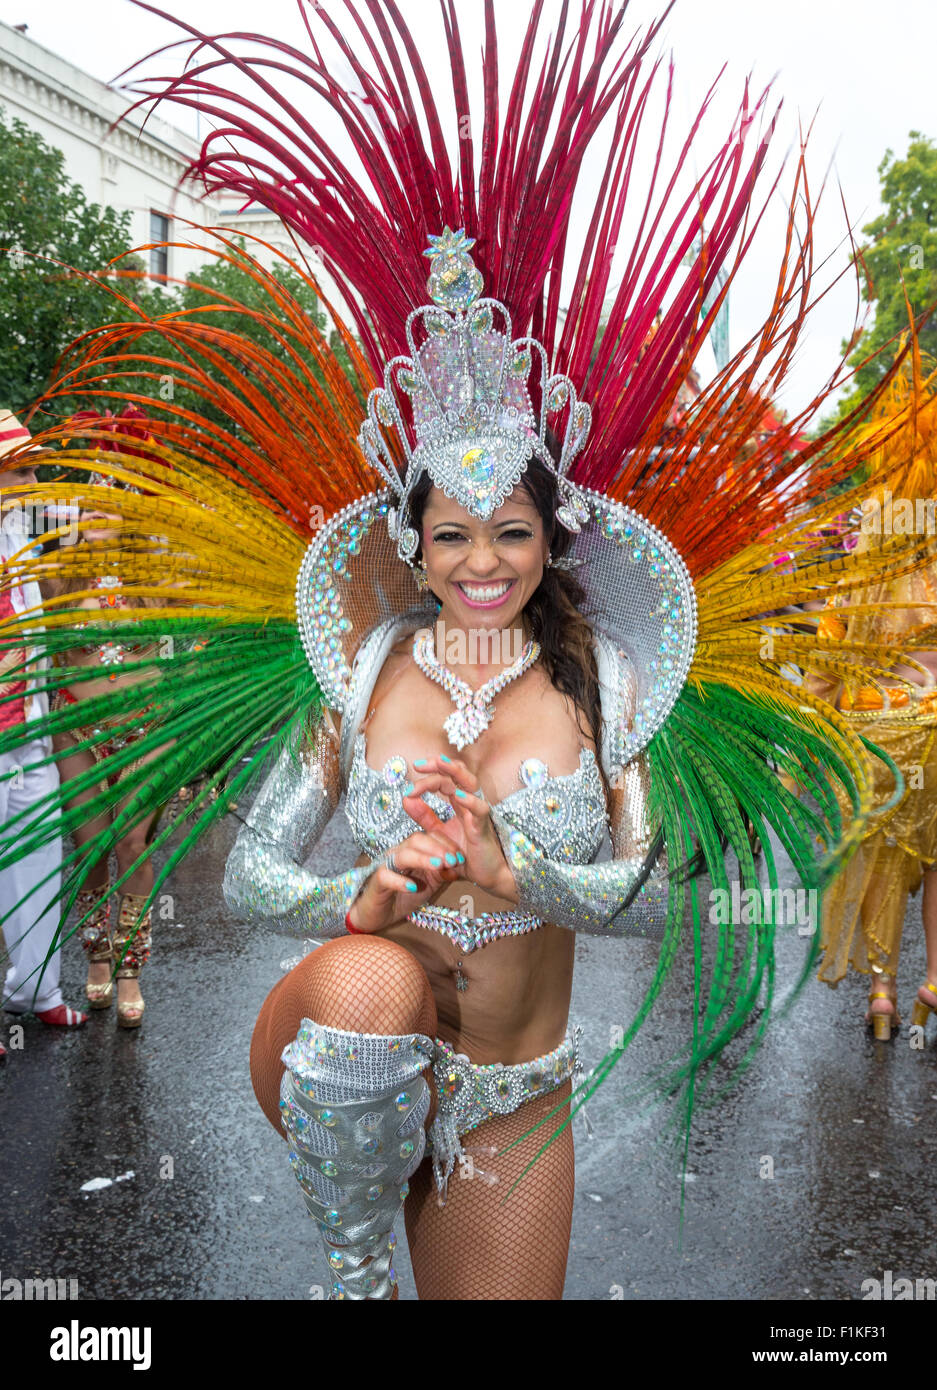 Celebration at the Notting Hill Carnival-The biggest street festival in Europe.  Carribean culture with colourful costumes Stock Photo